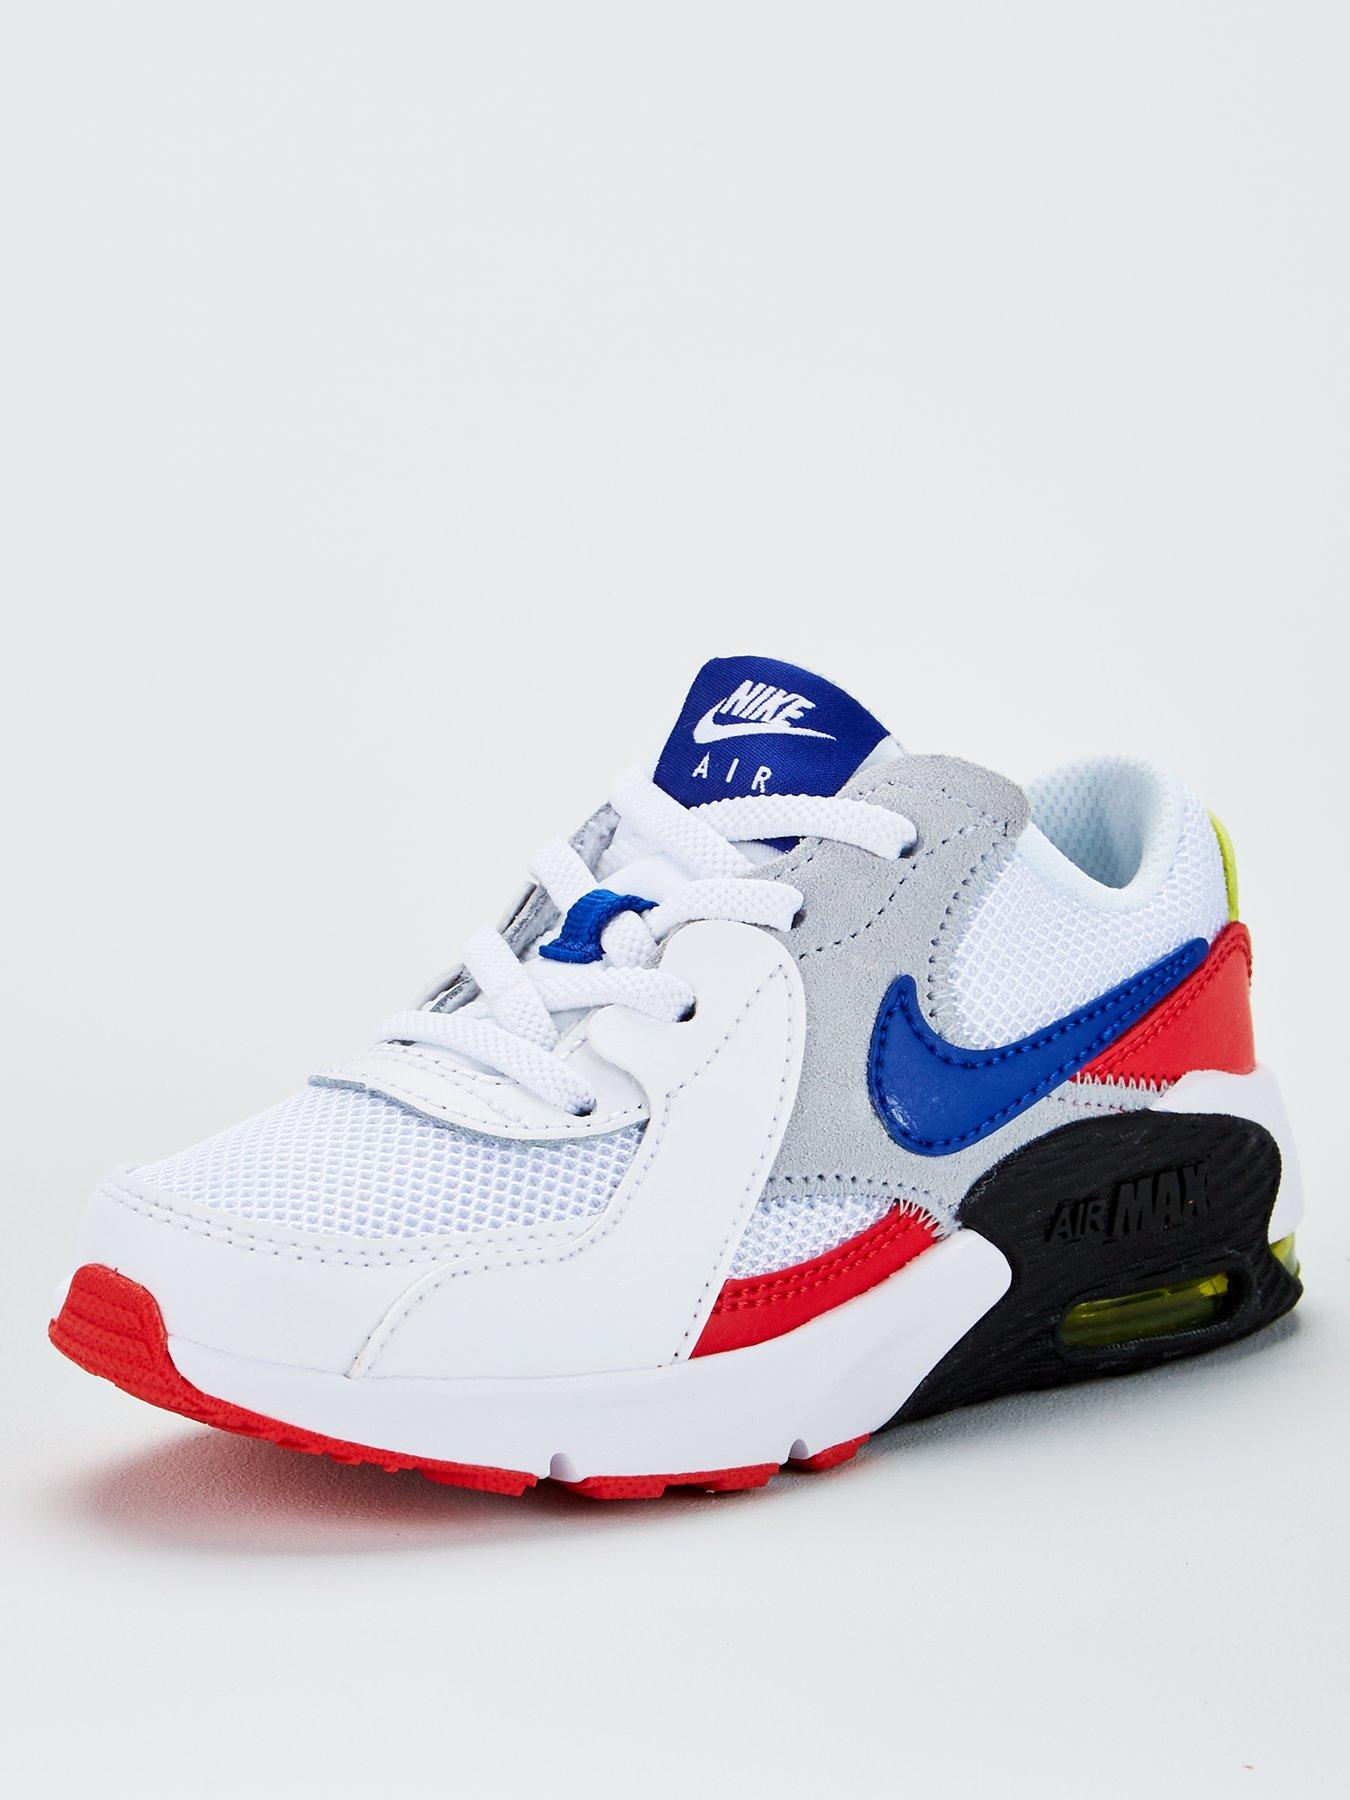 nike air max 217 red white and blue